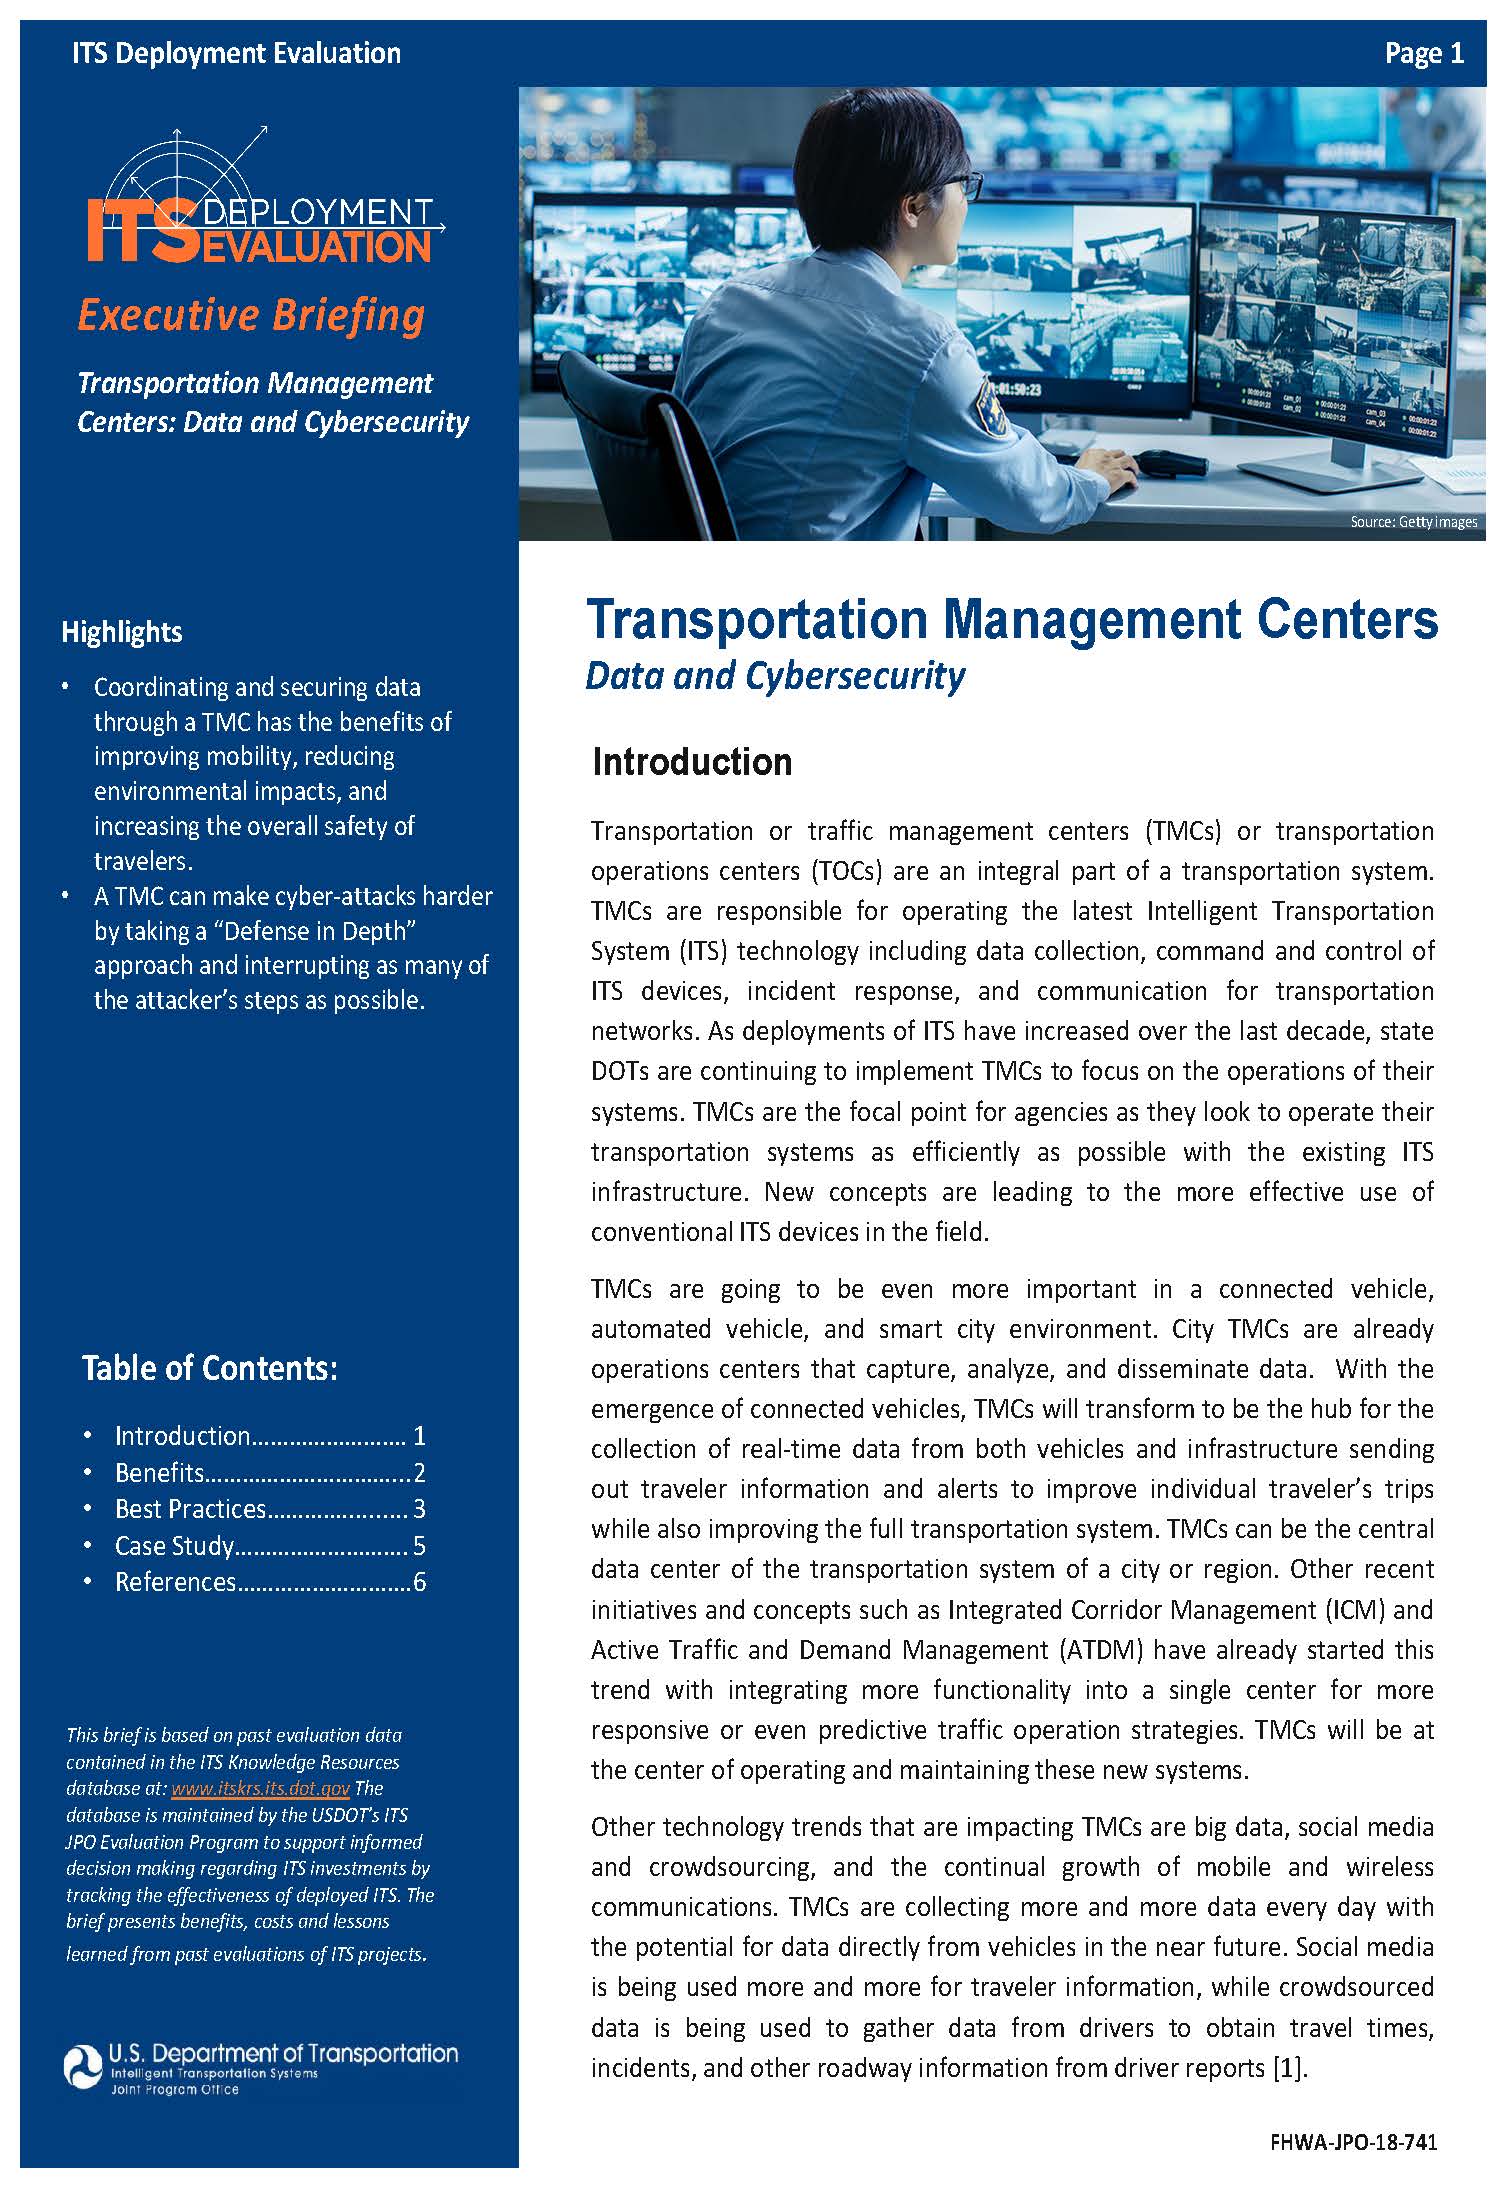 Cover Page of the Transportation Management Centers: Data and Cybersecurity Executive Briefing